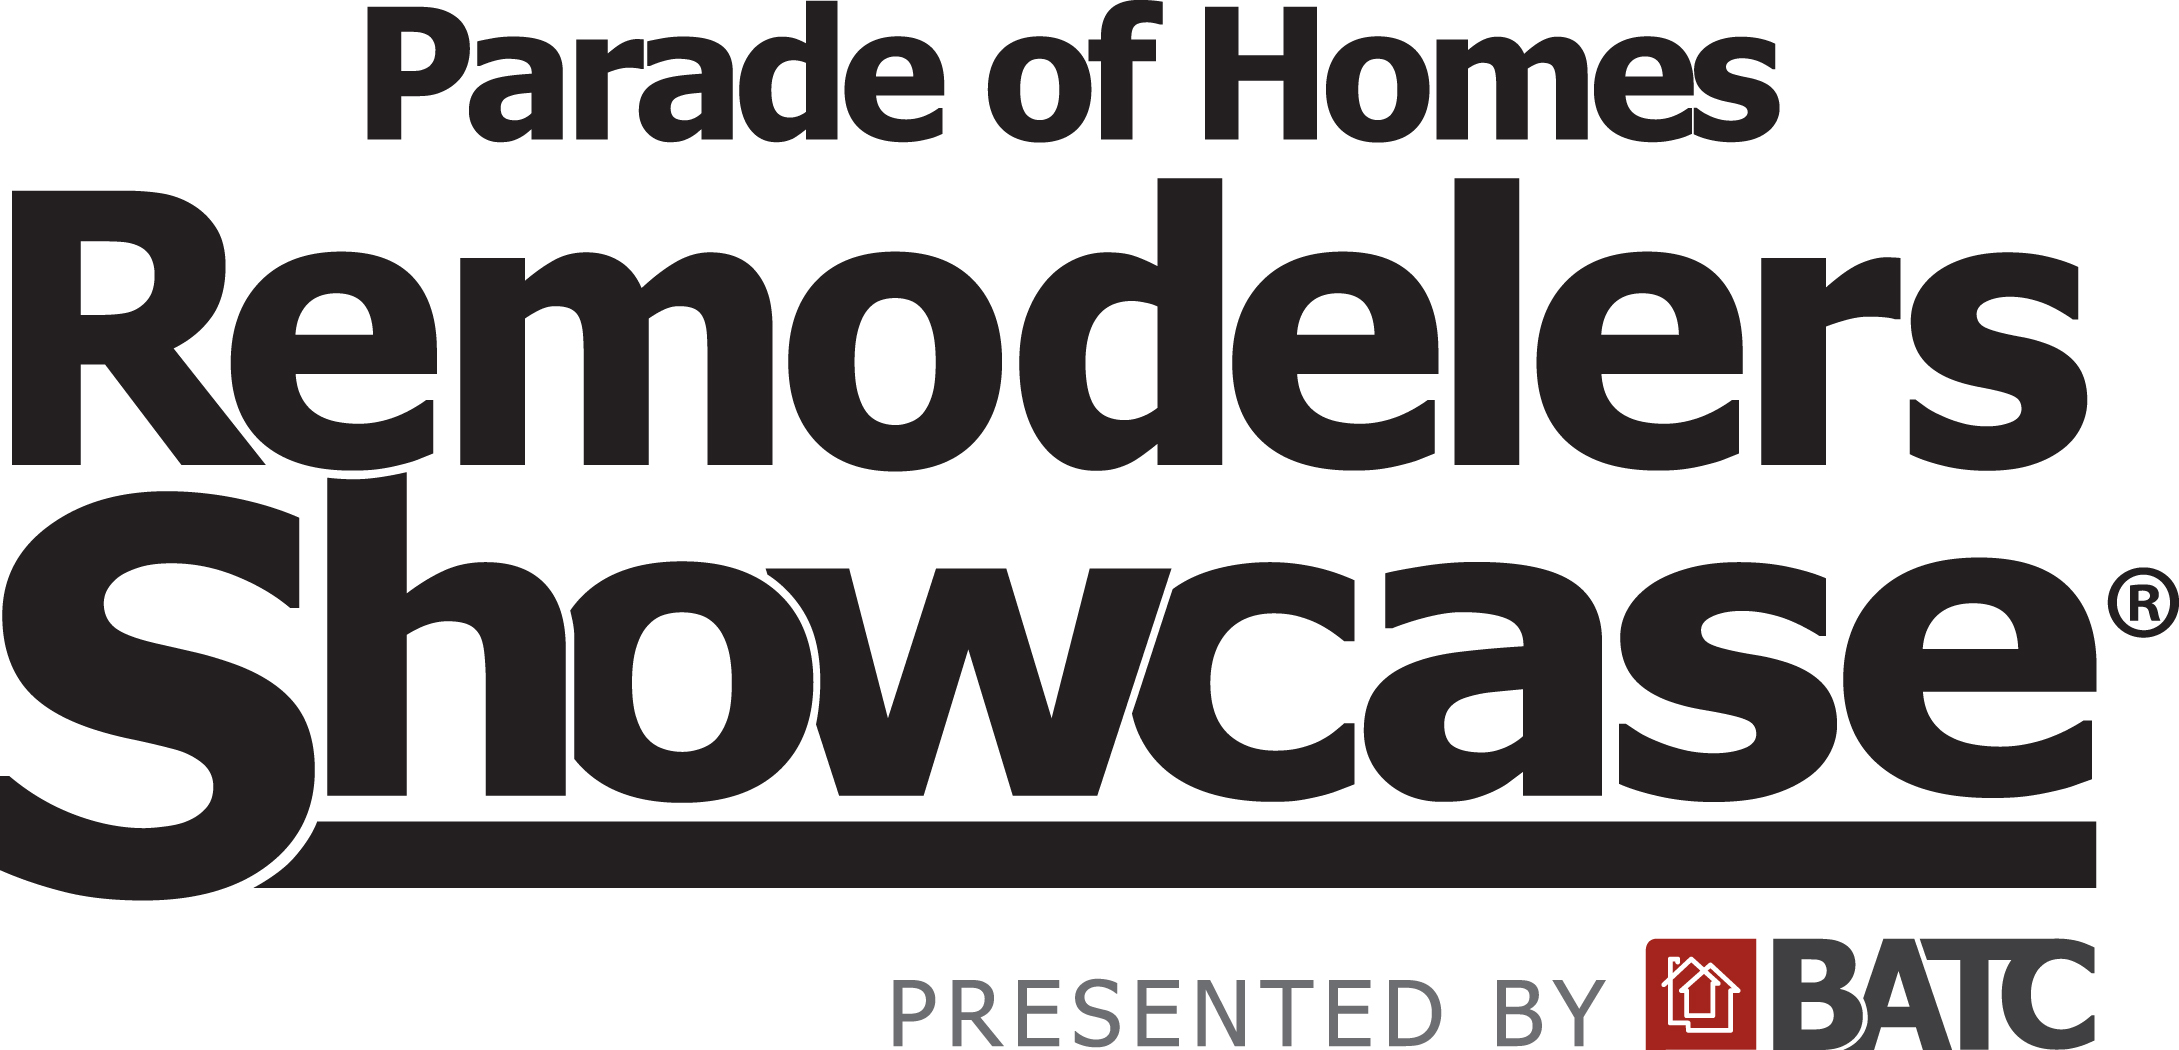 Image for Facts About the Spring 2013 Parade of Homes Remodelers Showcase®